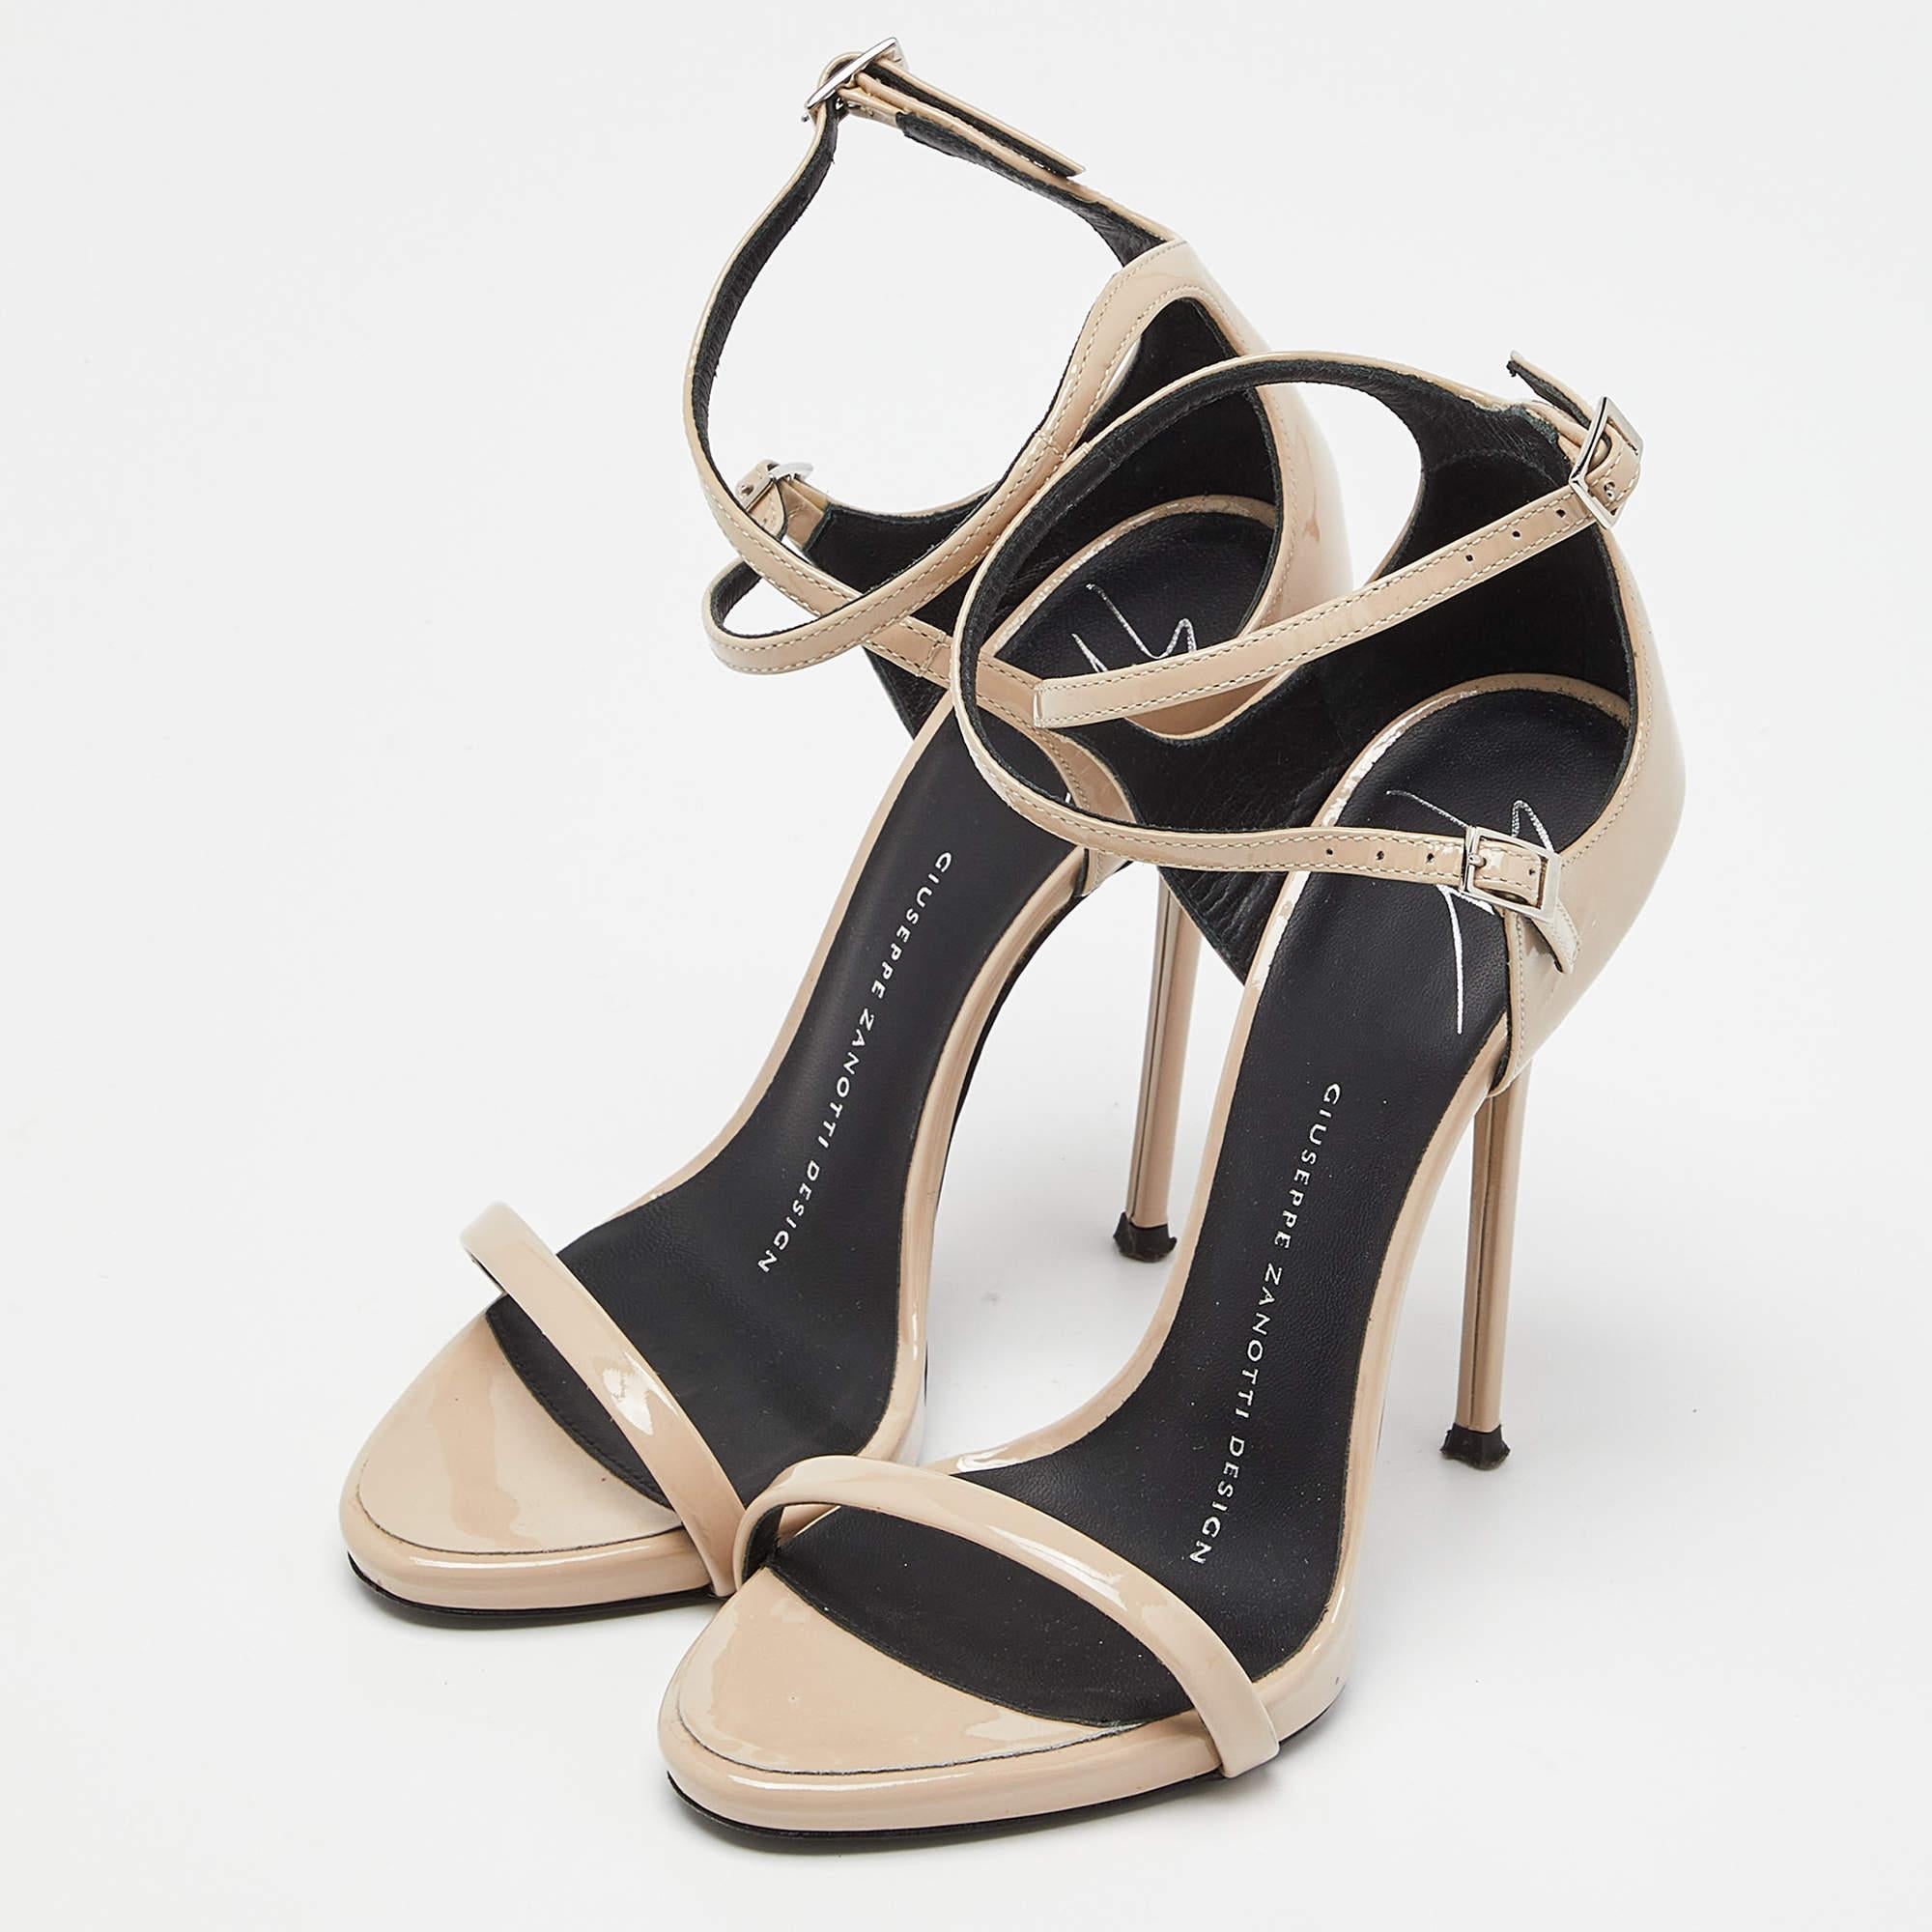 A perfect mix of elegant fashion and sensuous style, these Giuseppe Zanotti sandals come designed with three patent leather straps on each other. They are visually stunning and they stand tall on 12cm heels.

